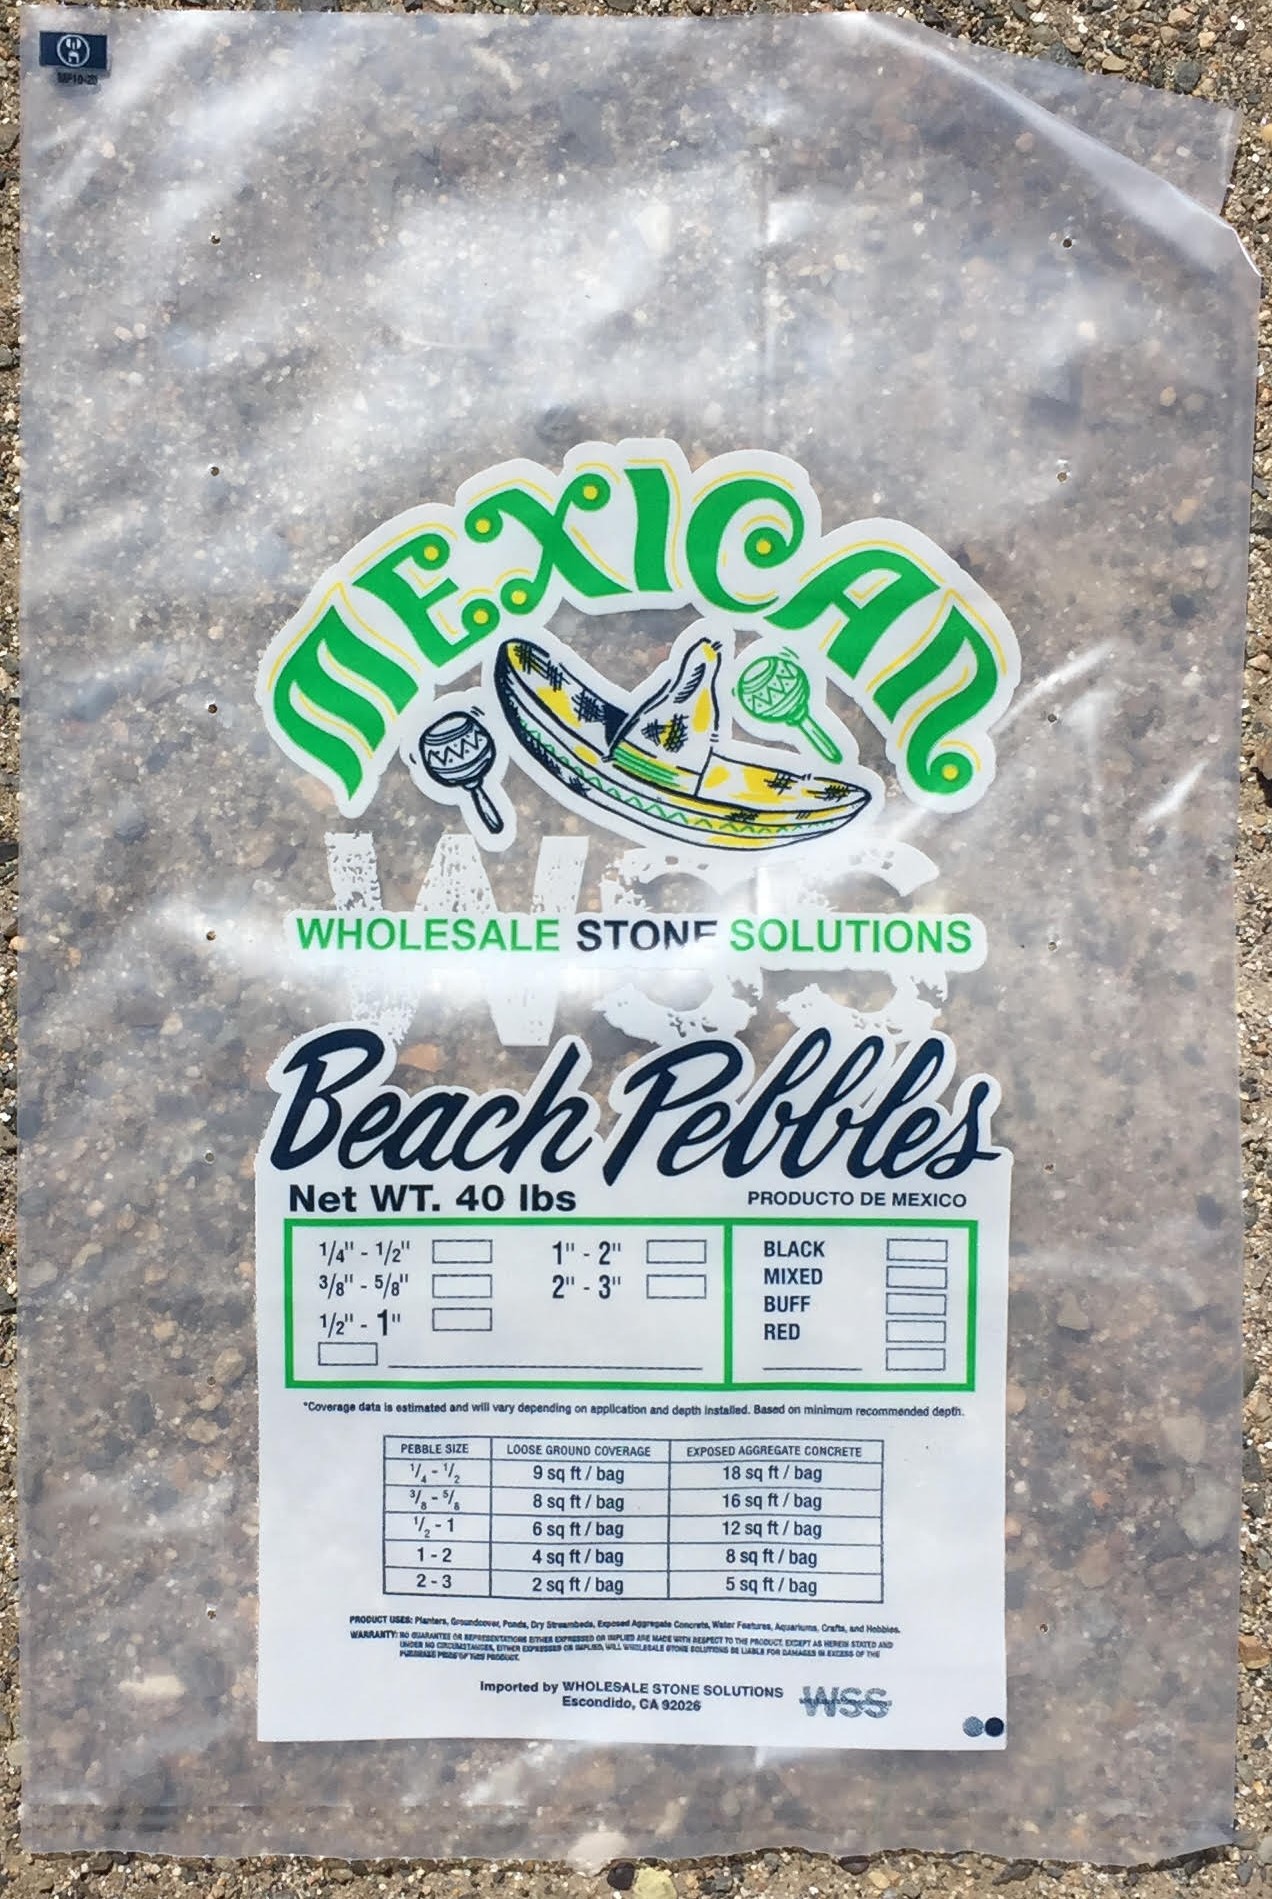 Wholesale Stone Solutions Branded 40# bag for Mexican Beach Pebbles